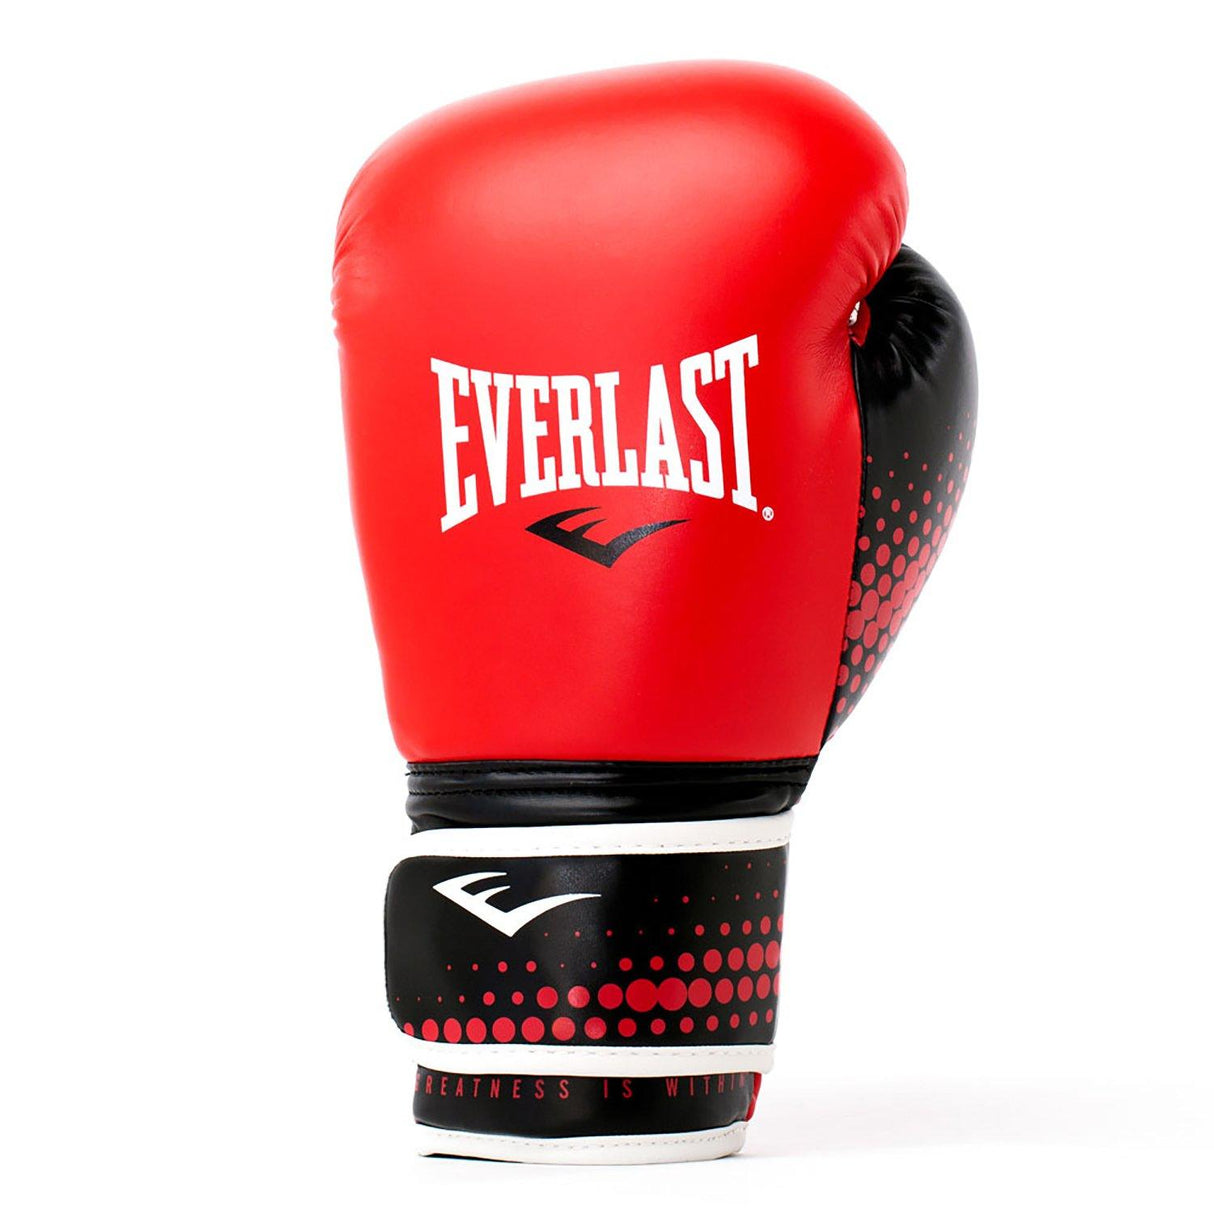 Guantes Boxeo Everlast Eve 1910 Sparring Laced Rojo